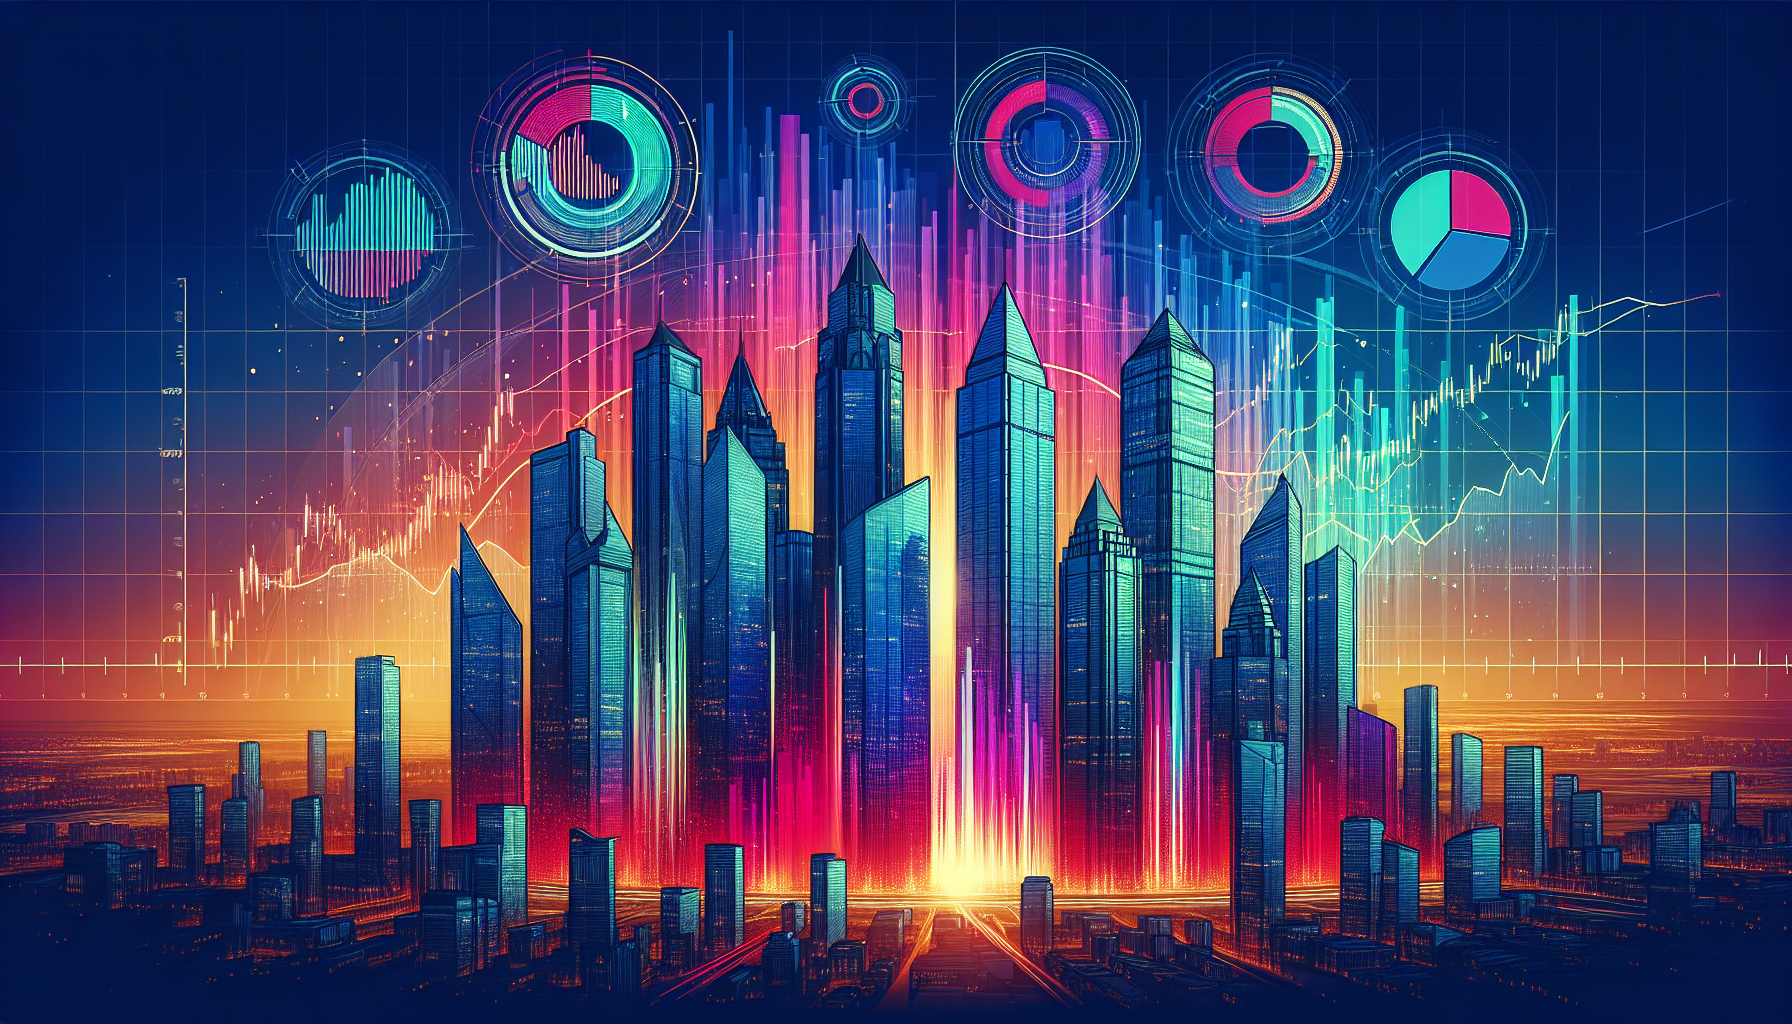 digital illustration of the Magnificent Seven Big Tech companies as futuristic, towering skyscrapers against a sunset skyline, with financial charts and graphs projected into the sky, symbolizing thei